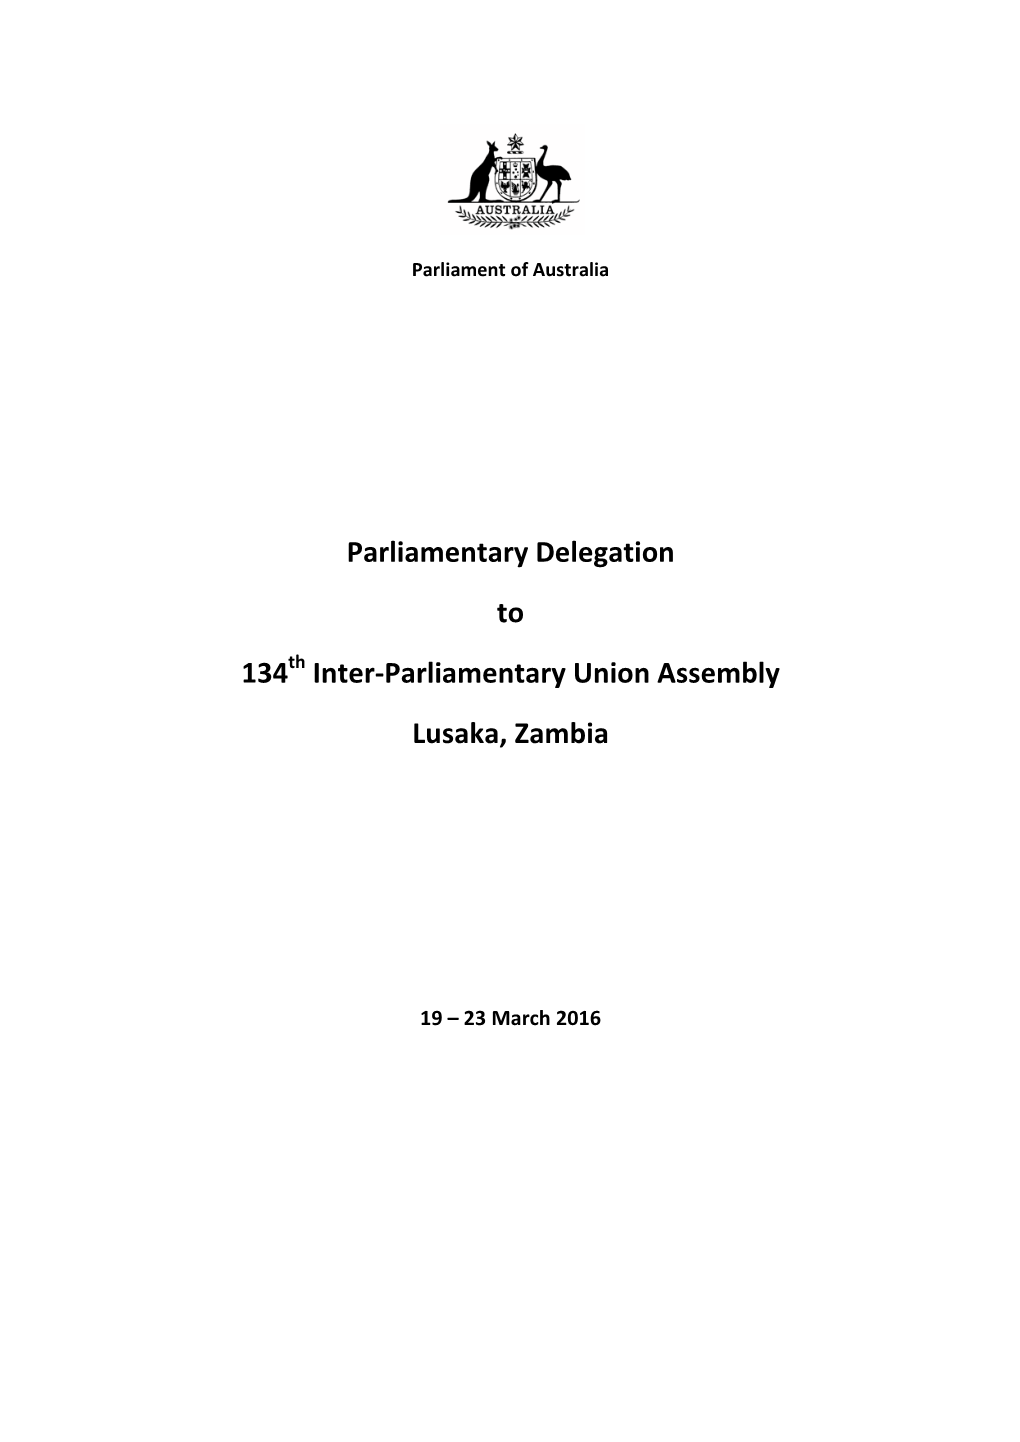 Parliamentary Delegation to 134Th Inter-Parliamentary Union Assembly Lusaka, Zambia